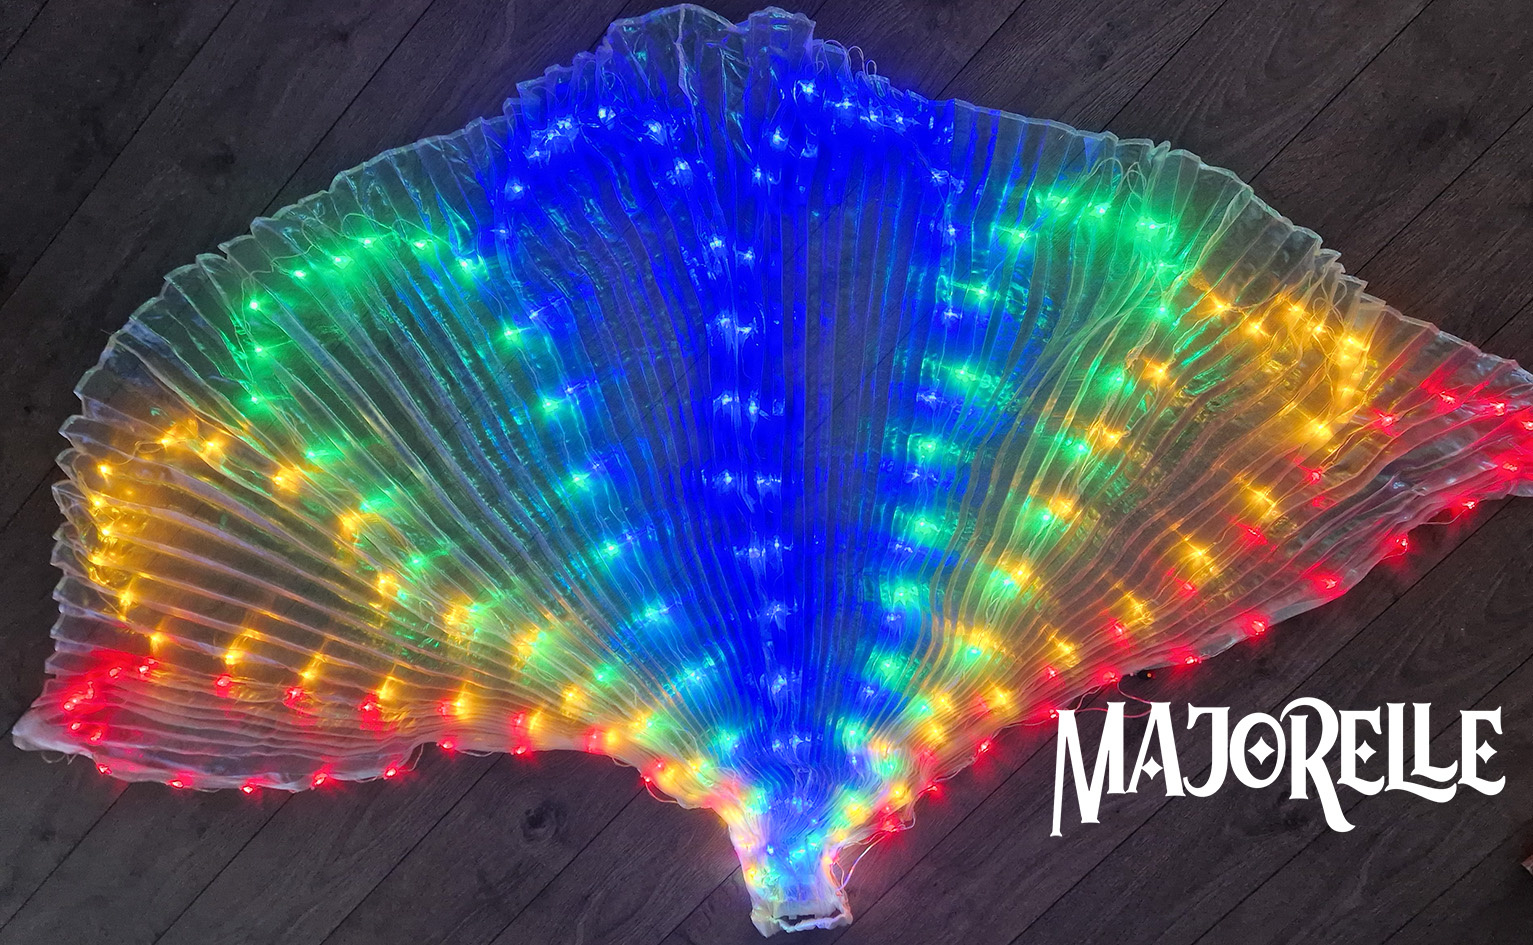 Isis Wings / Isis Schleier mit Led lights in multi color Schmetterling